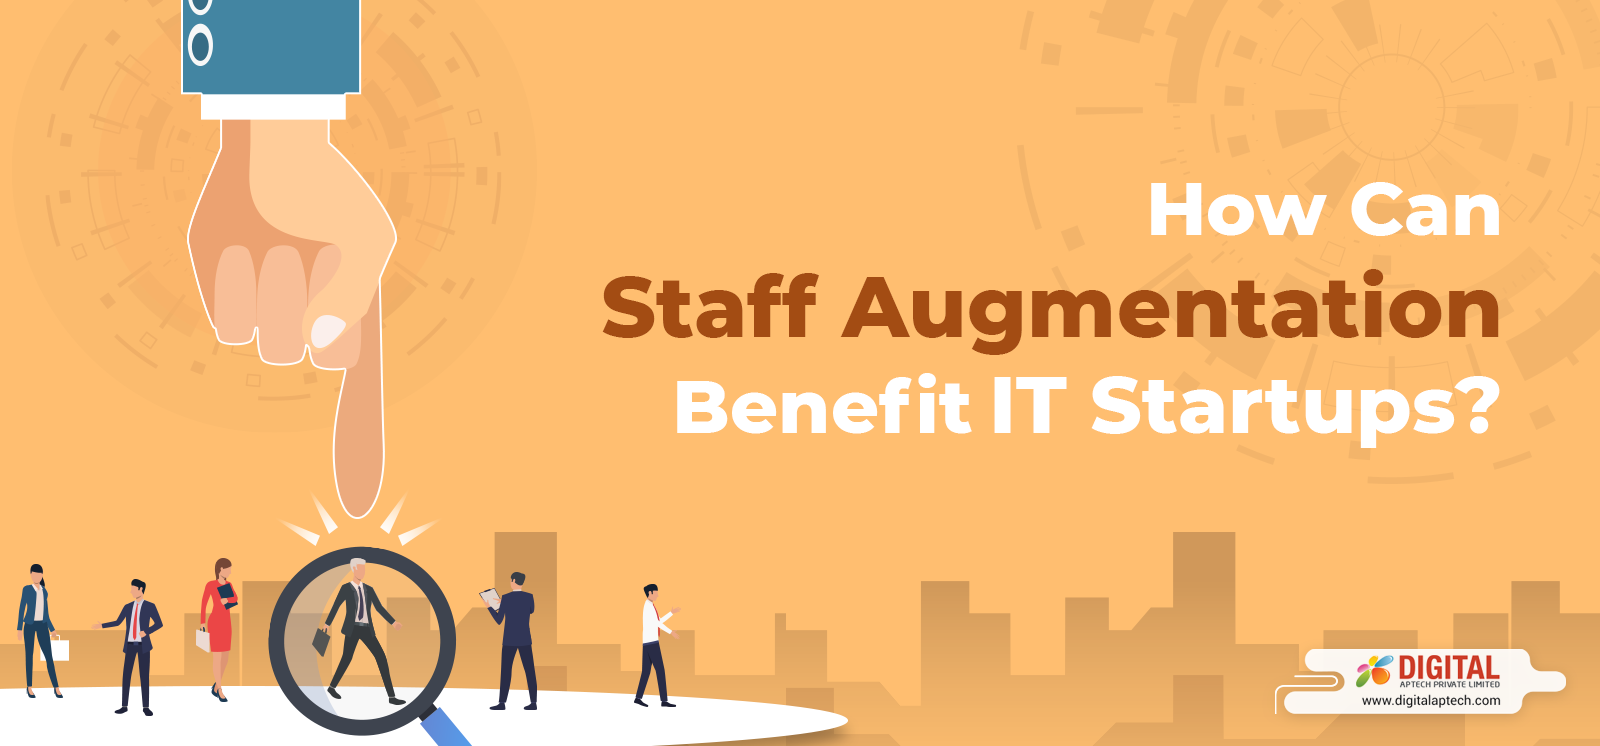 How Can Staff Augmentation Benefit IT Startups?